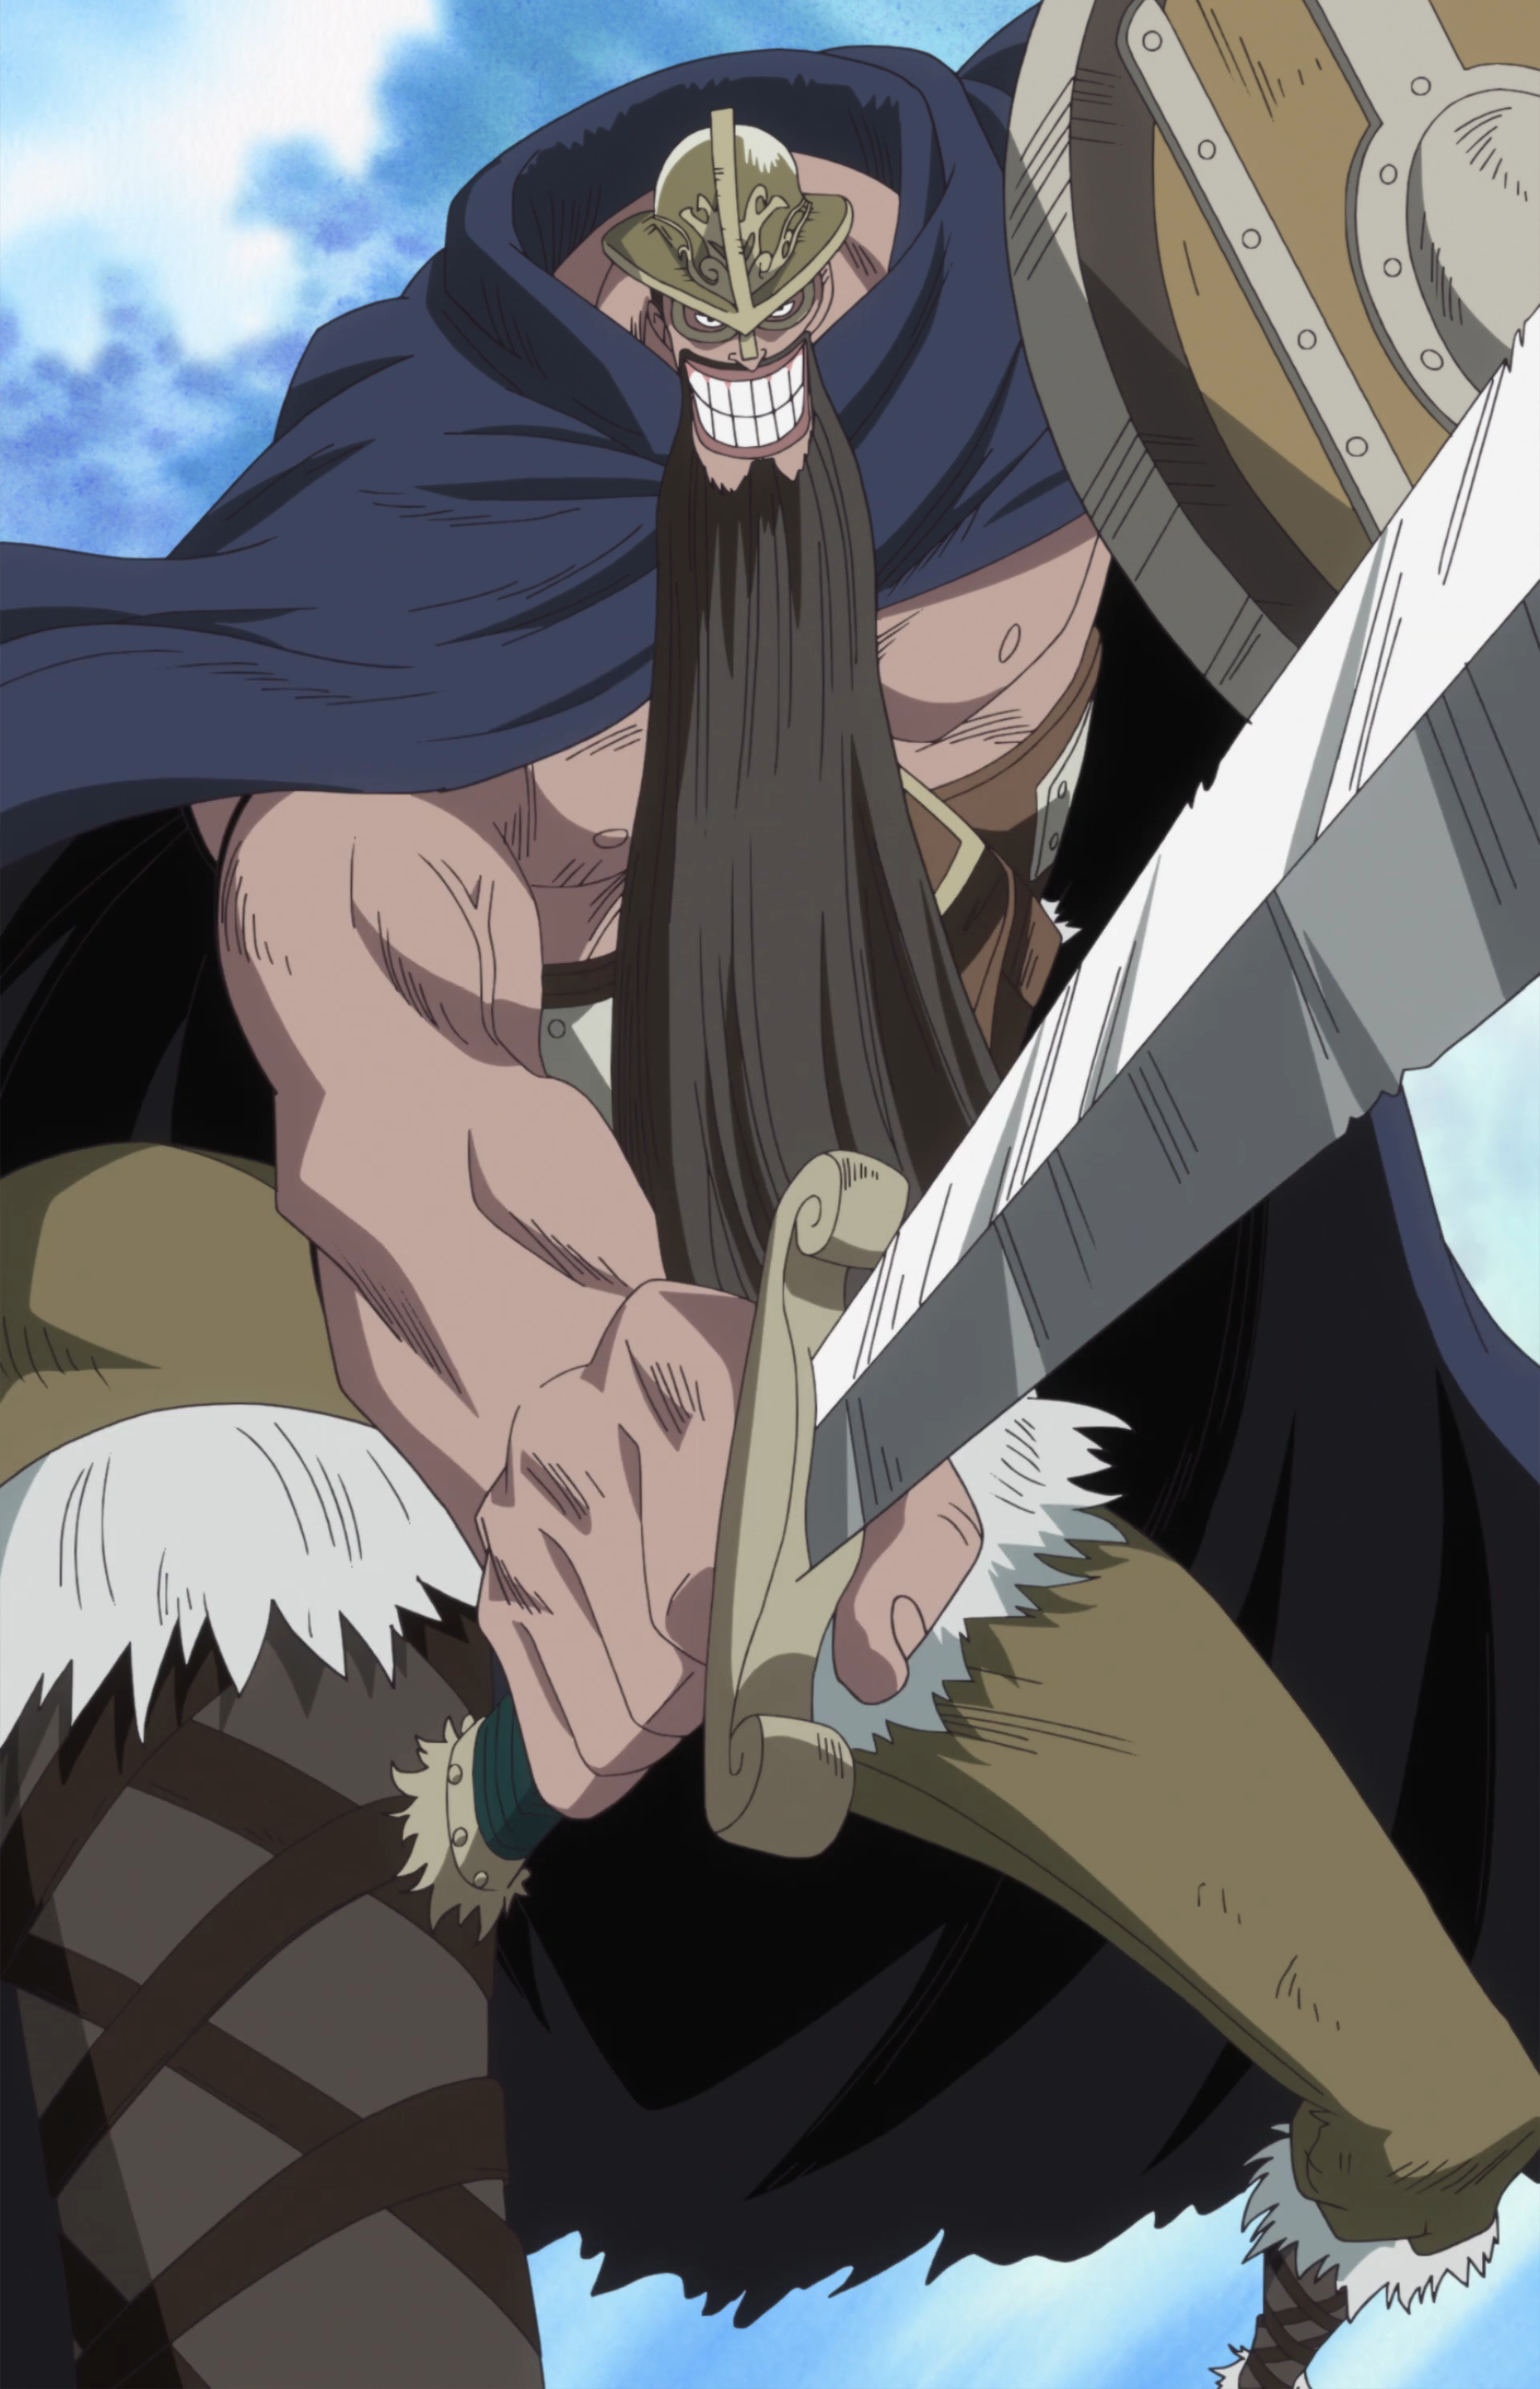 One Piece Wiki - GIN He is a pirate and the Combat